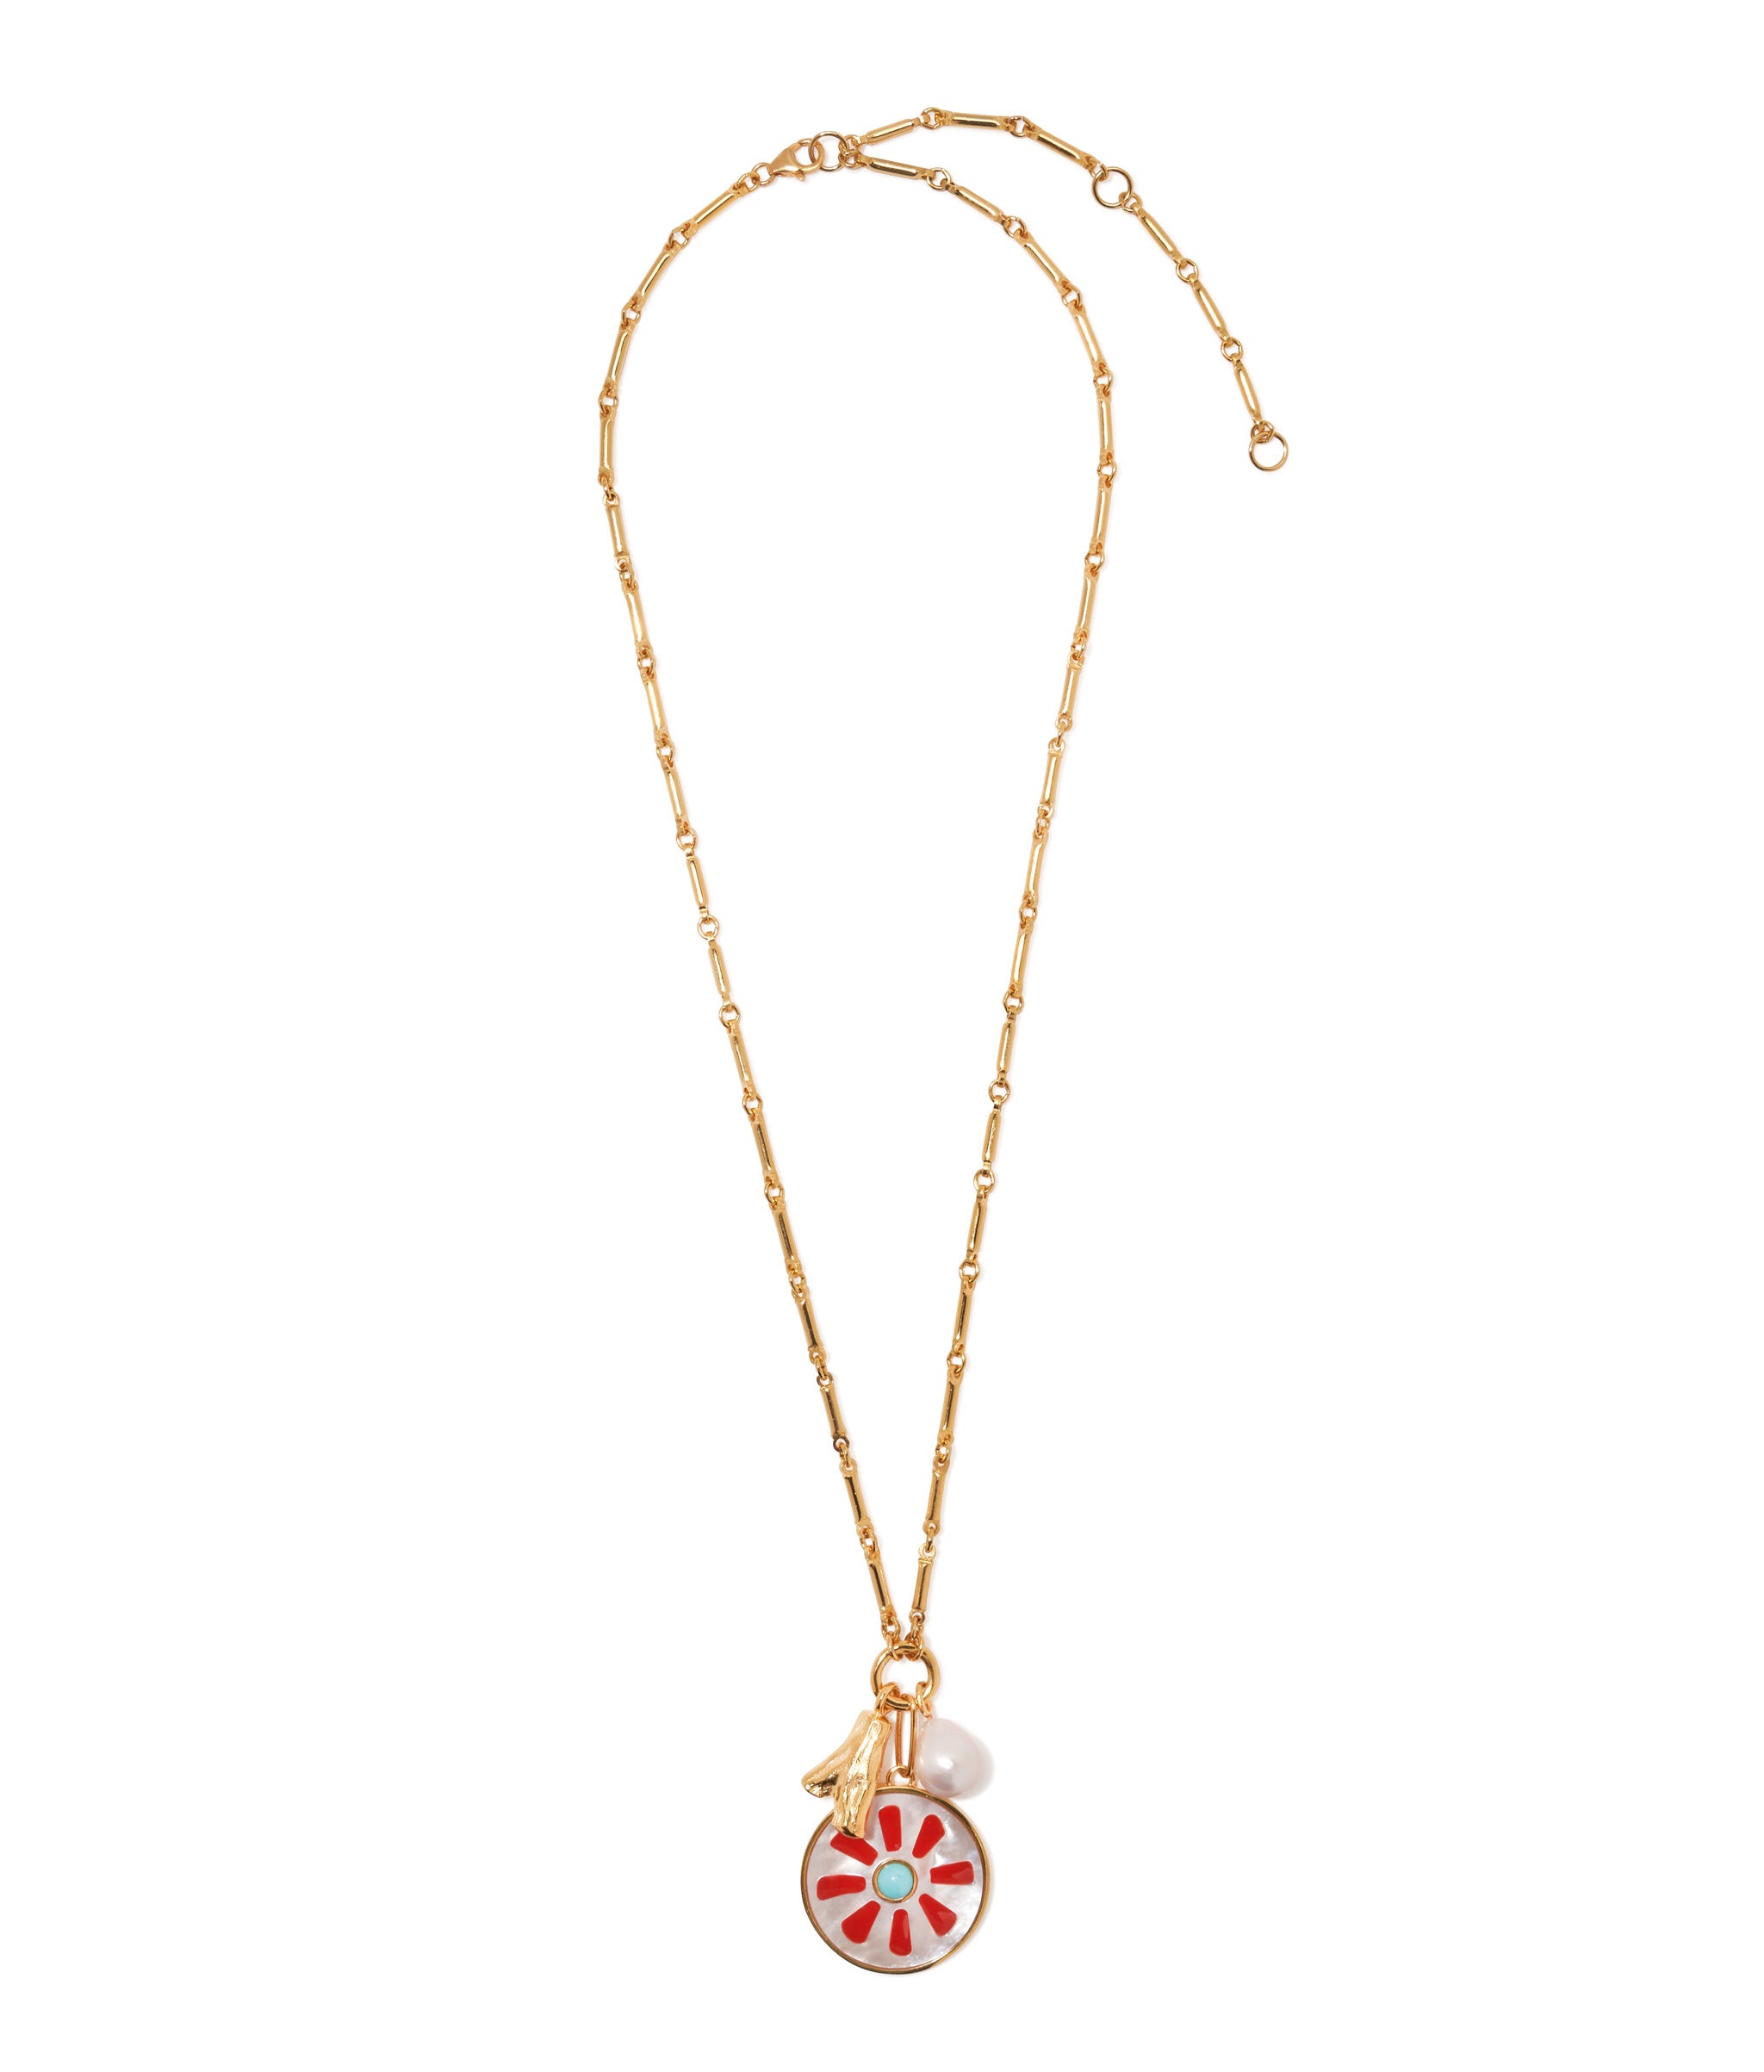 Equinox Charm Necklace. Gold-plated brass chain with engraved mother-of-pearl, red enamel, turquoise, and gold charms.